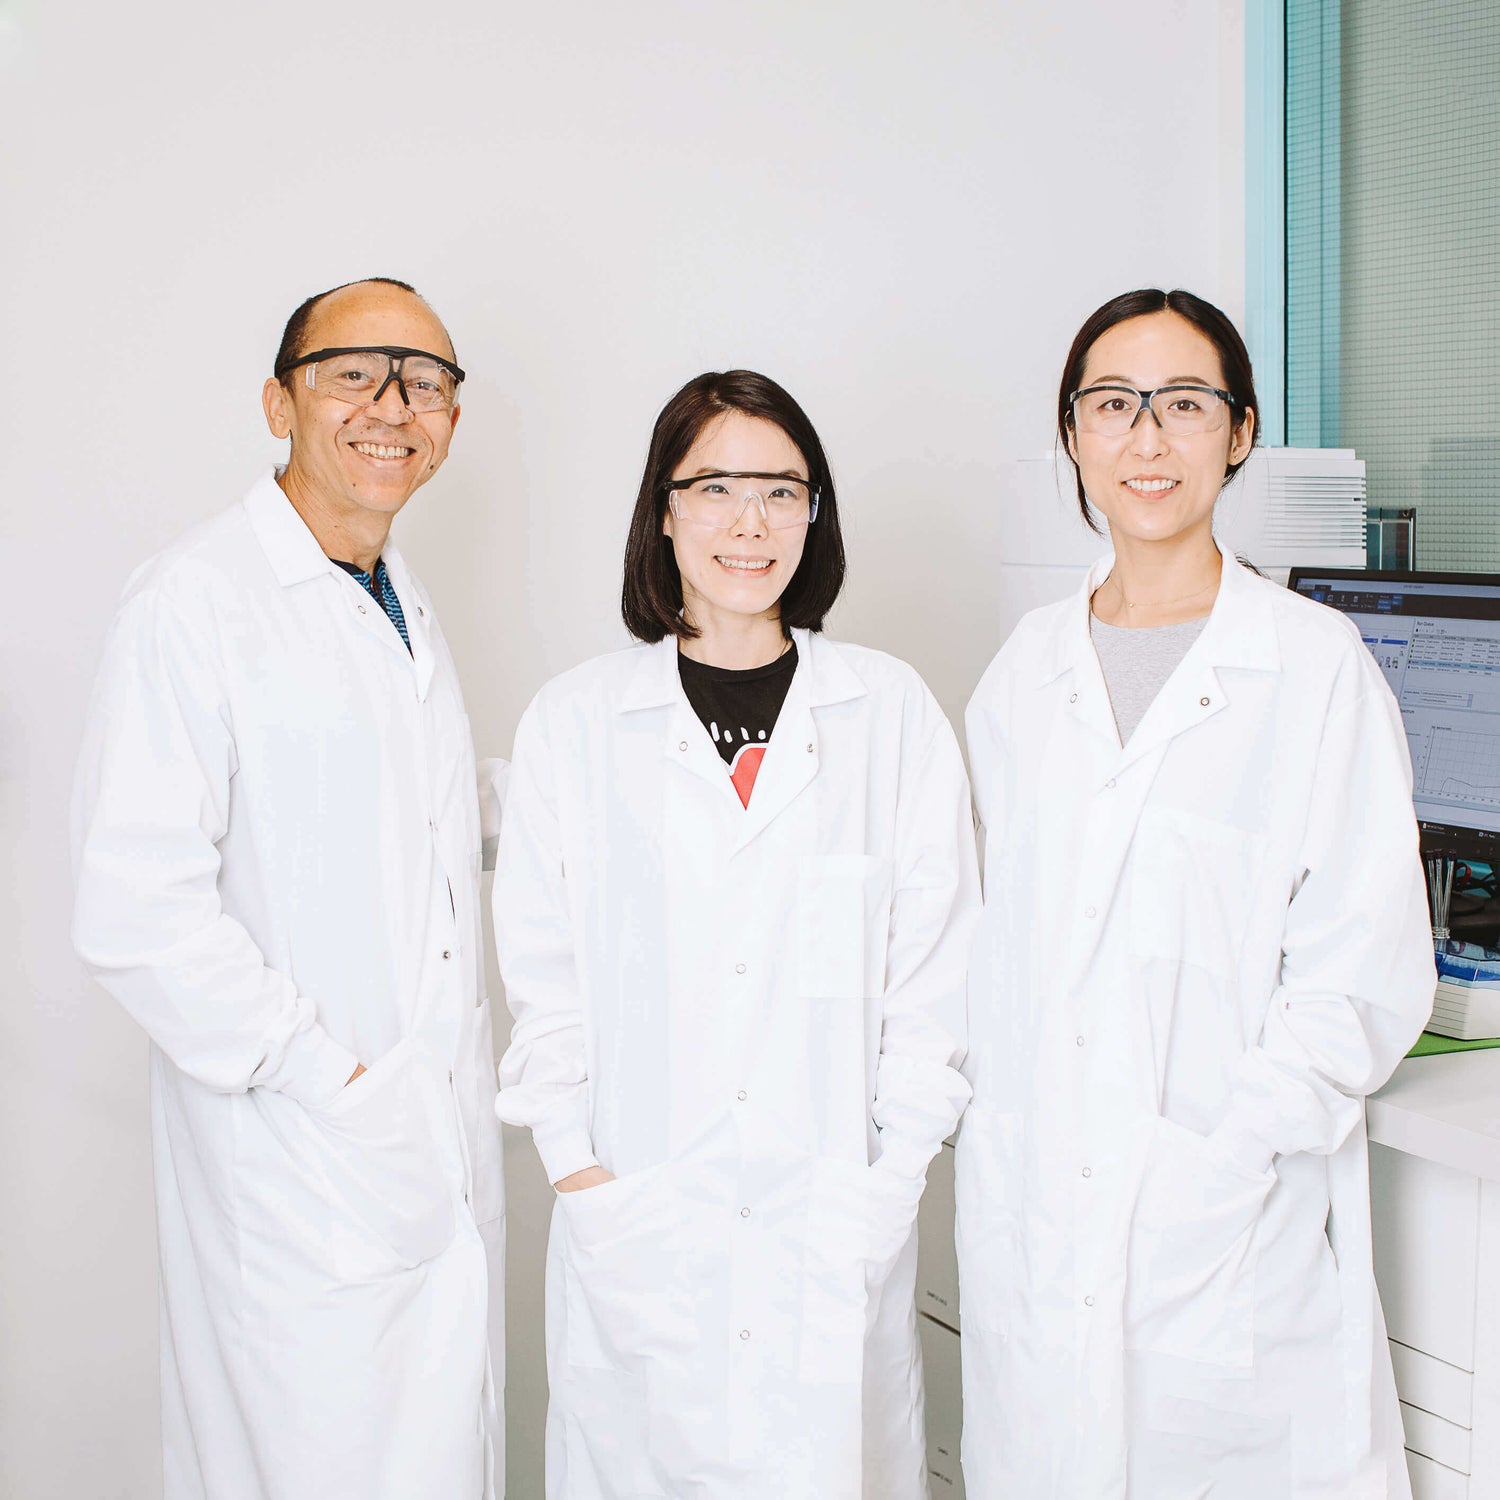 arcwell scientists with diverse backgrounds focused on science, health improvement and vitamin supplements.